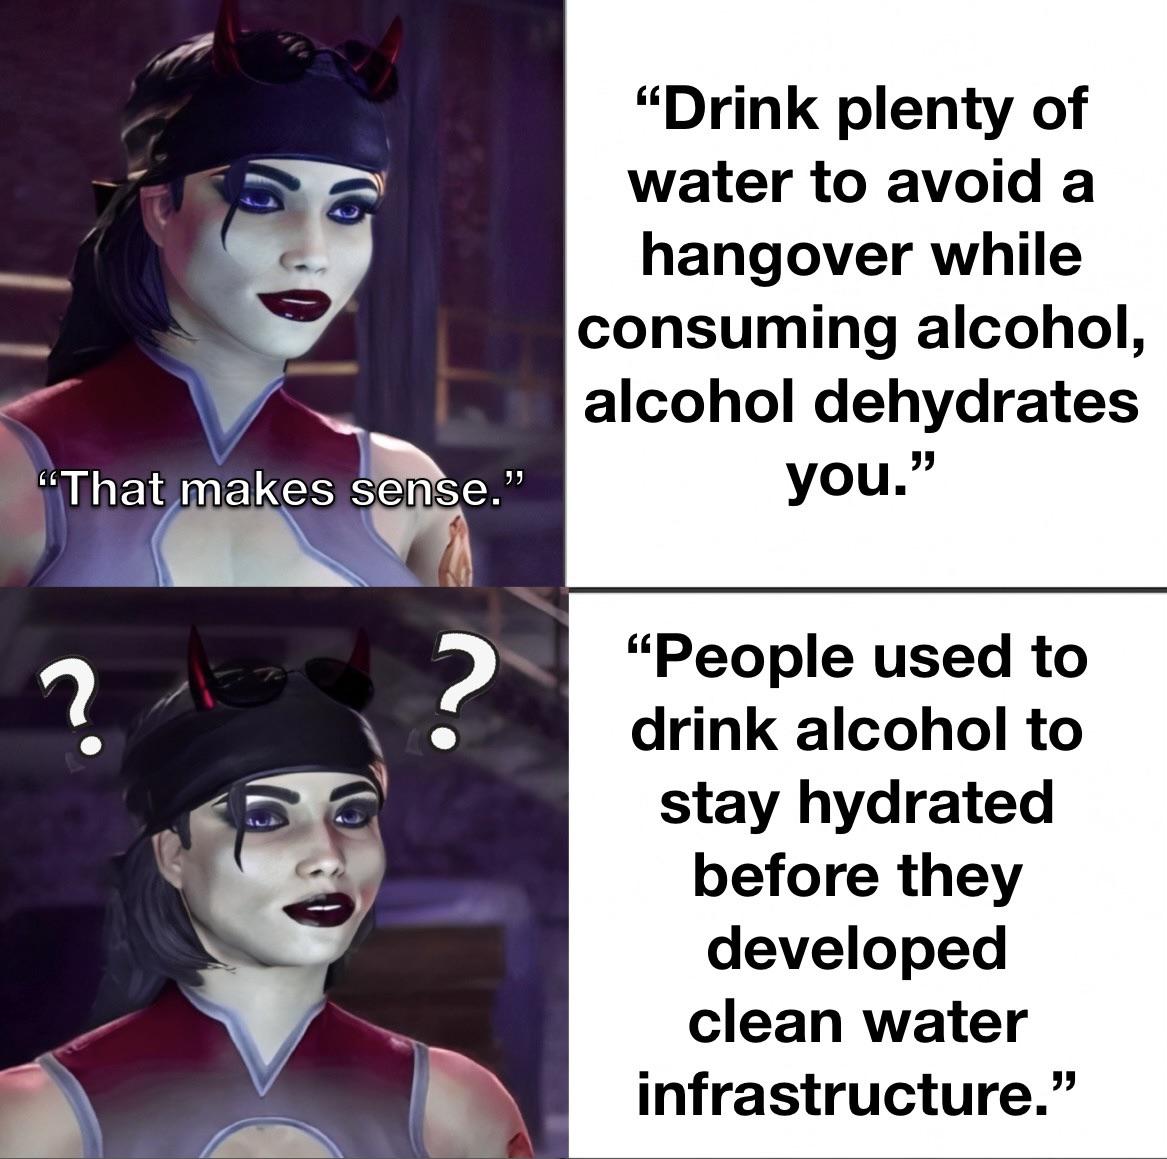 dank memes - head - 6 222 "That makes sense." ? ? "Drink plenty of water to avoid a hangover while consuming alcohol, alcohol dehydrates you." "People used to drink alcohol to stay hydrated before they developed clean water infrastructure."